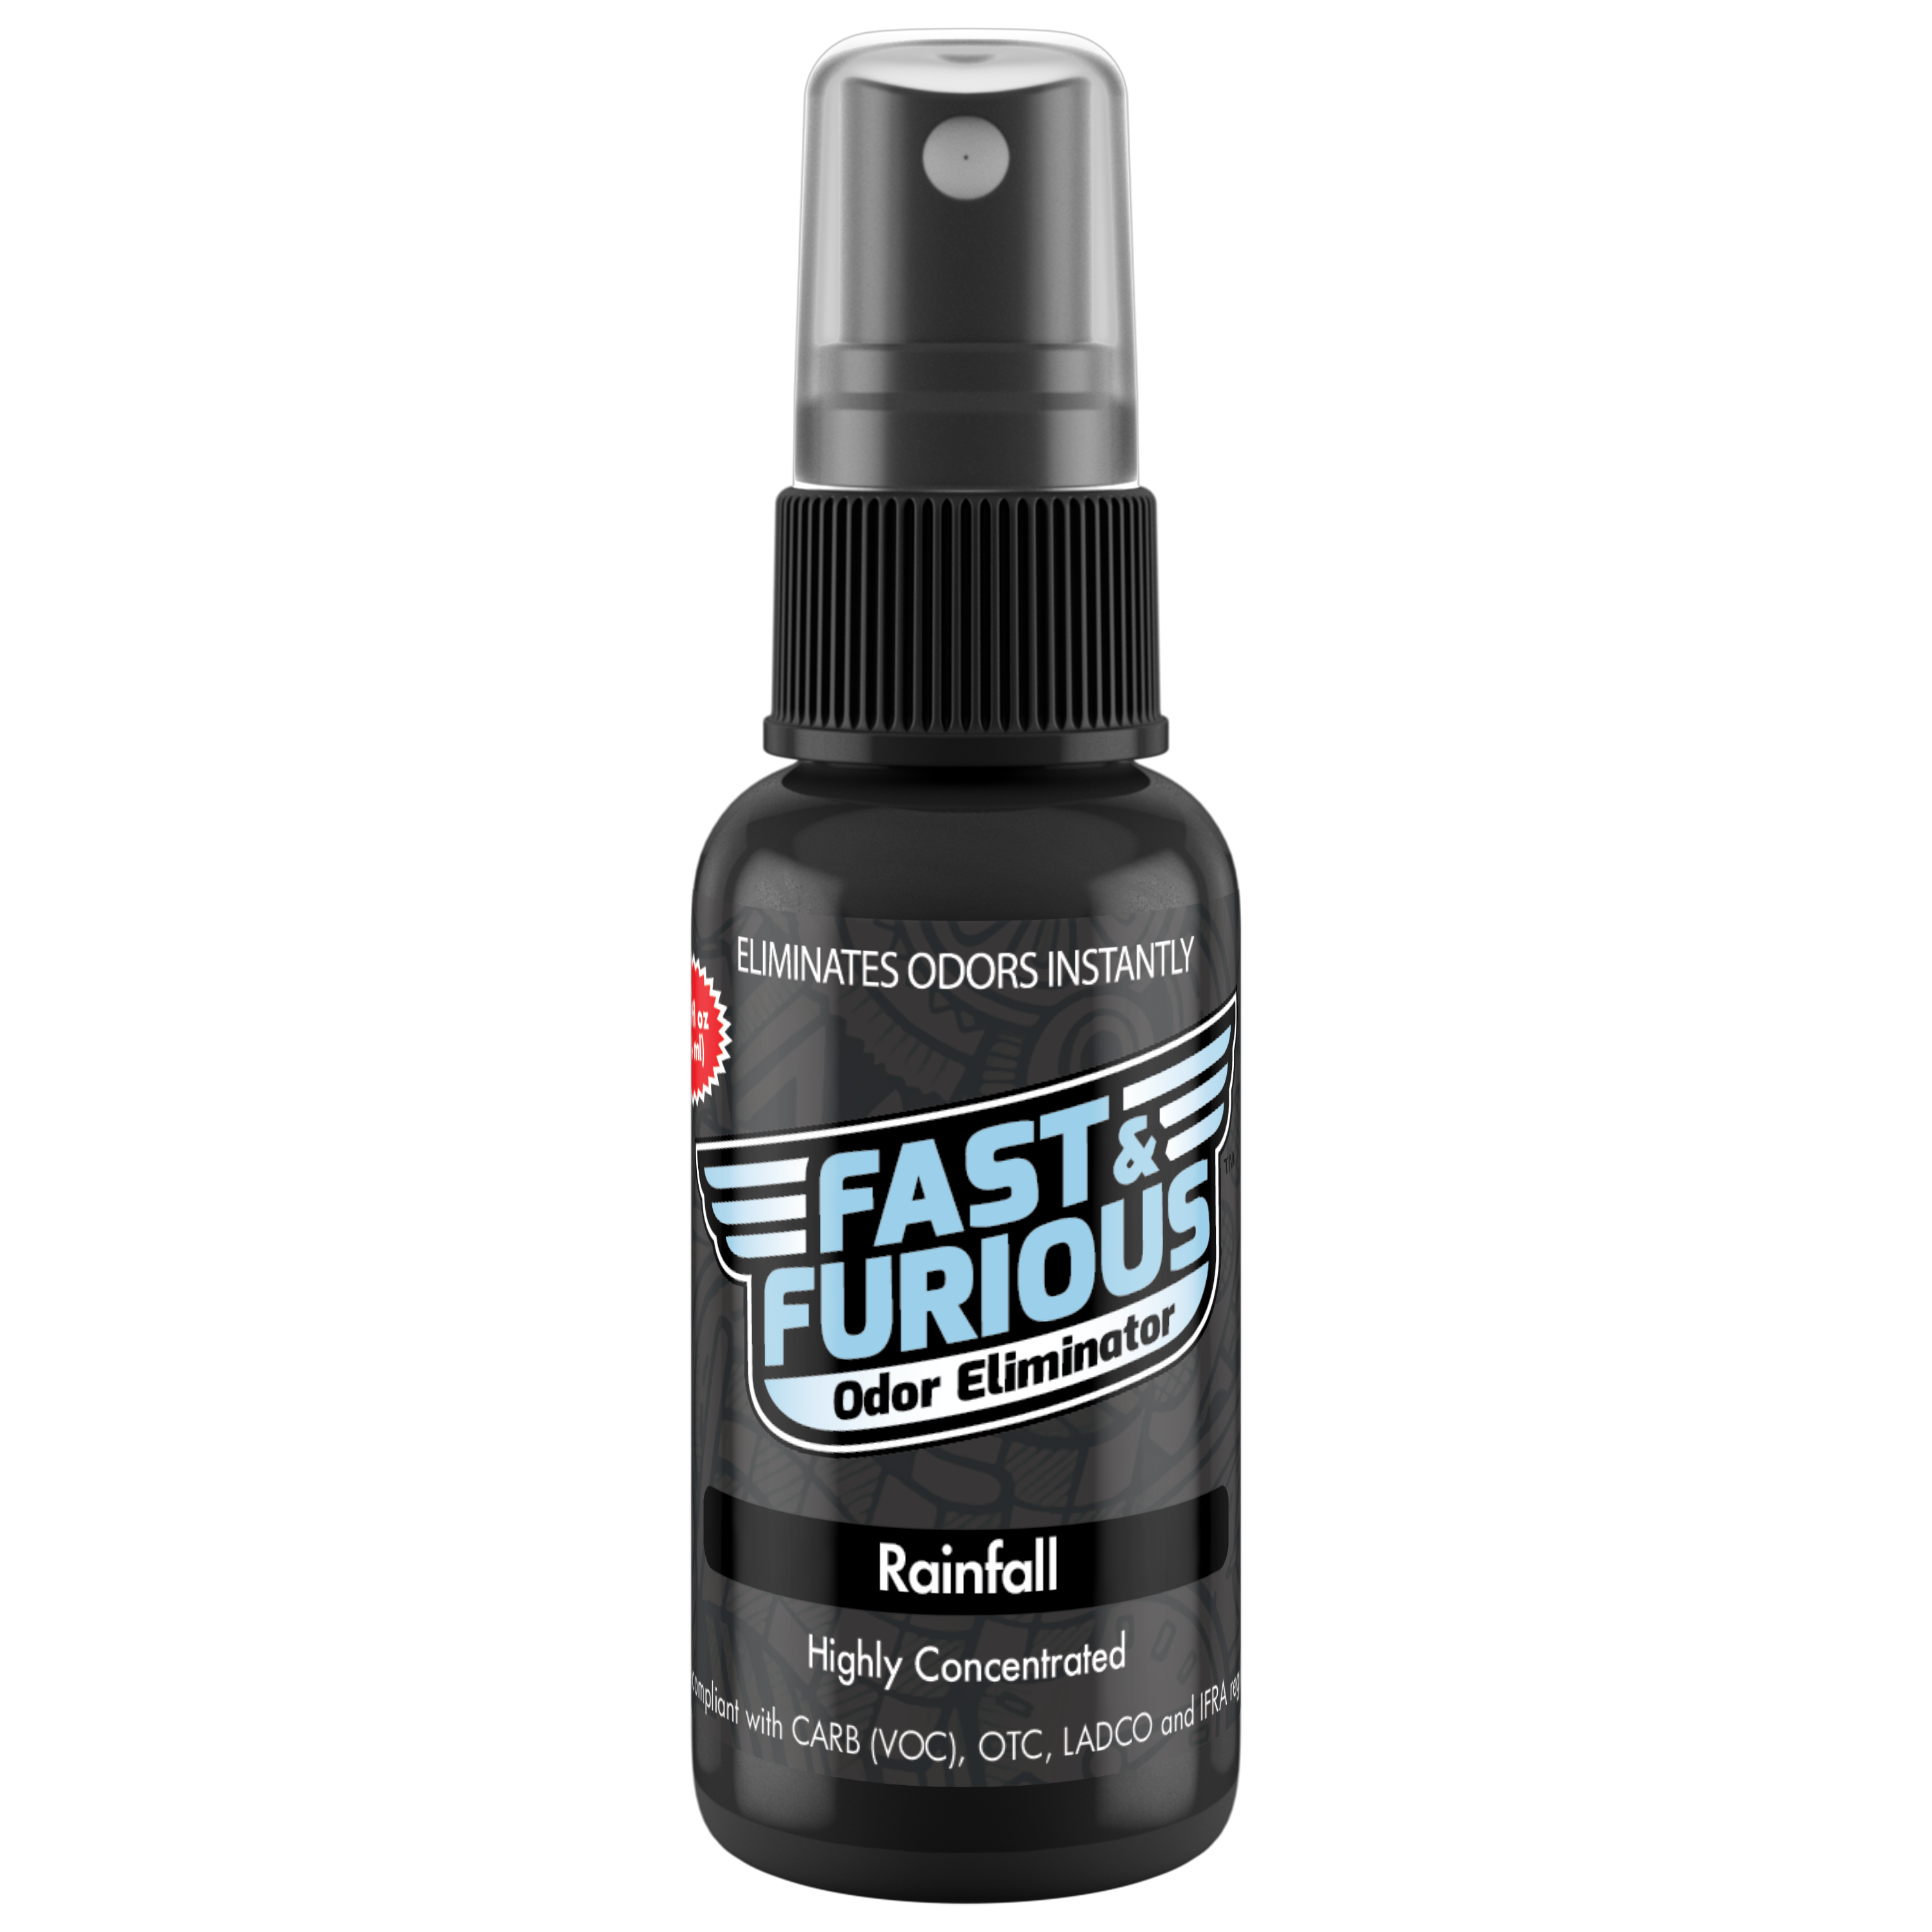 Fast and Furious Odor Eliminator - Rainfall Scent